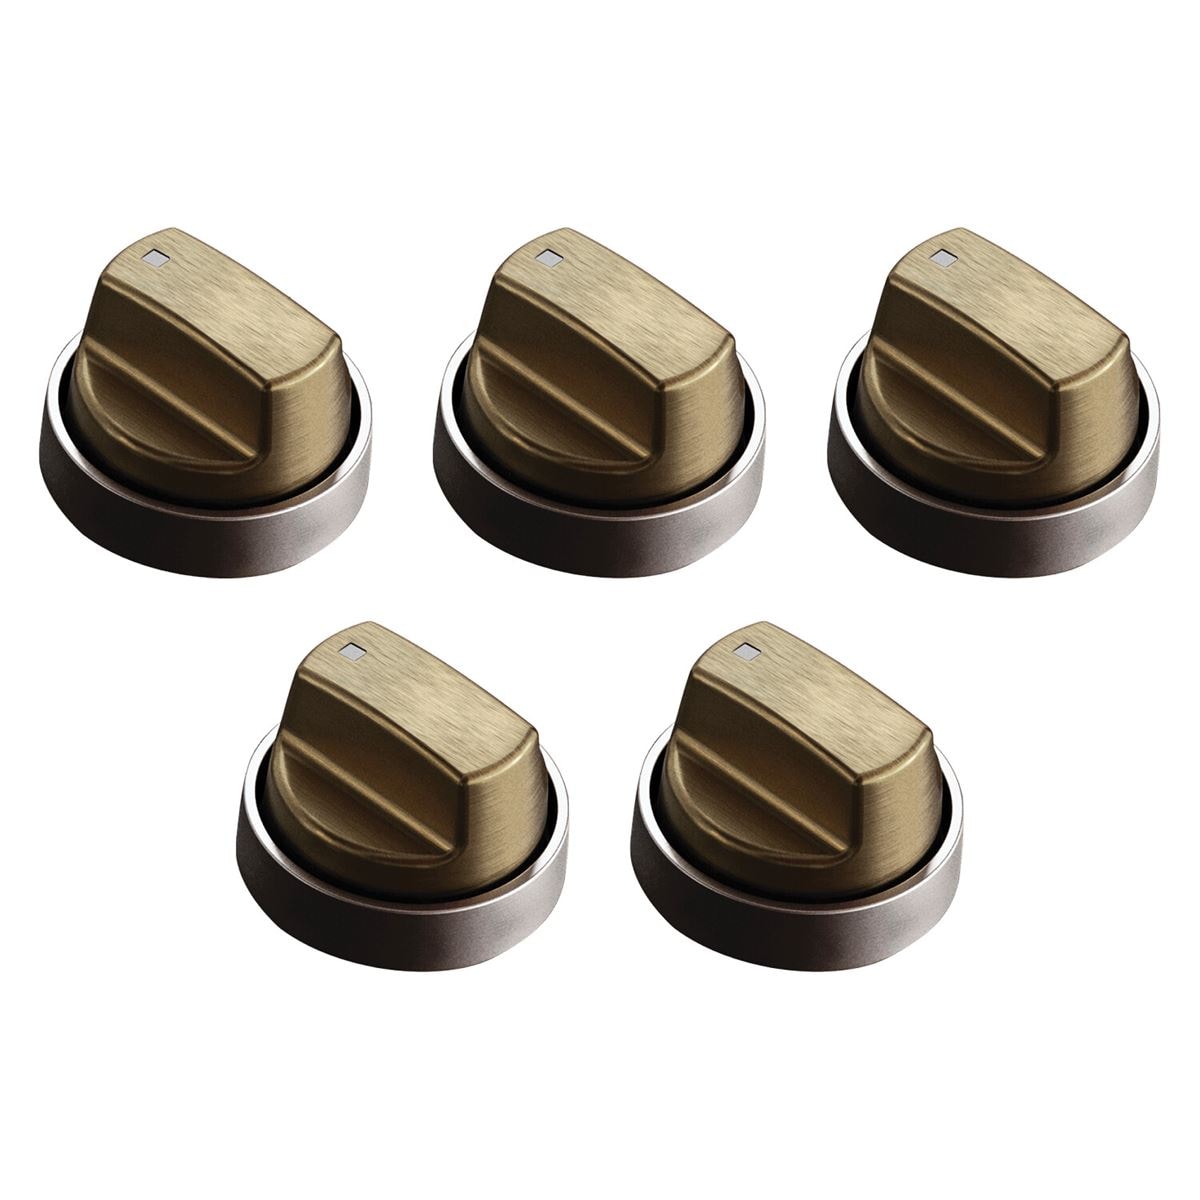 https://www.subzero-wolf.com/-/media/images/united-states/accessory-images/brass-knob_cooktop_36-kit.jpg?quality=80&height=1200&width=1200&hash=82348628657CDD94E63CD69DF540FE49